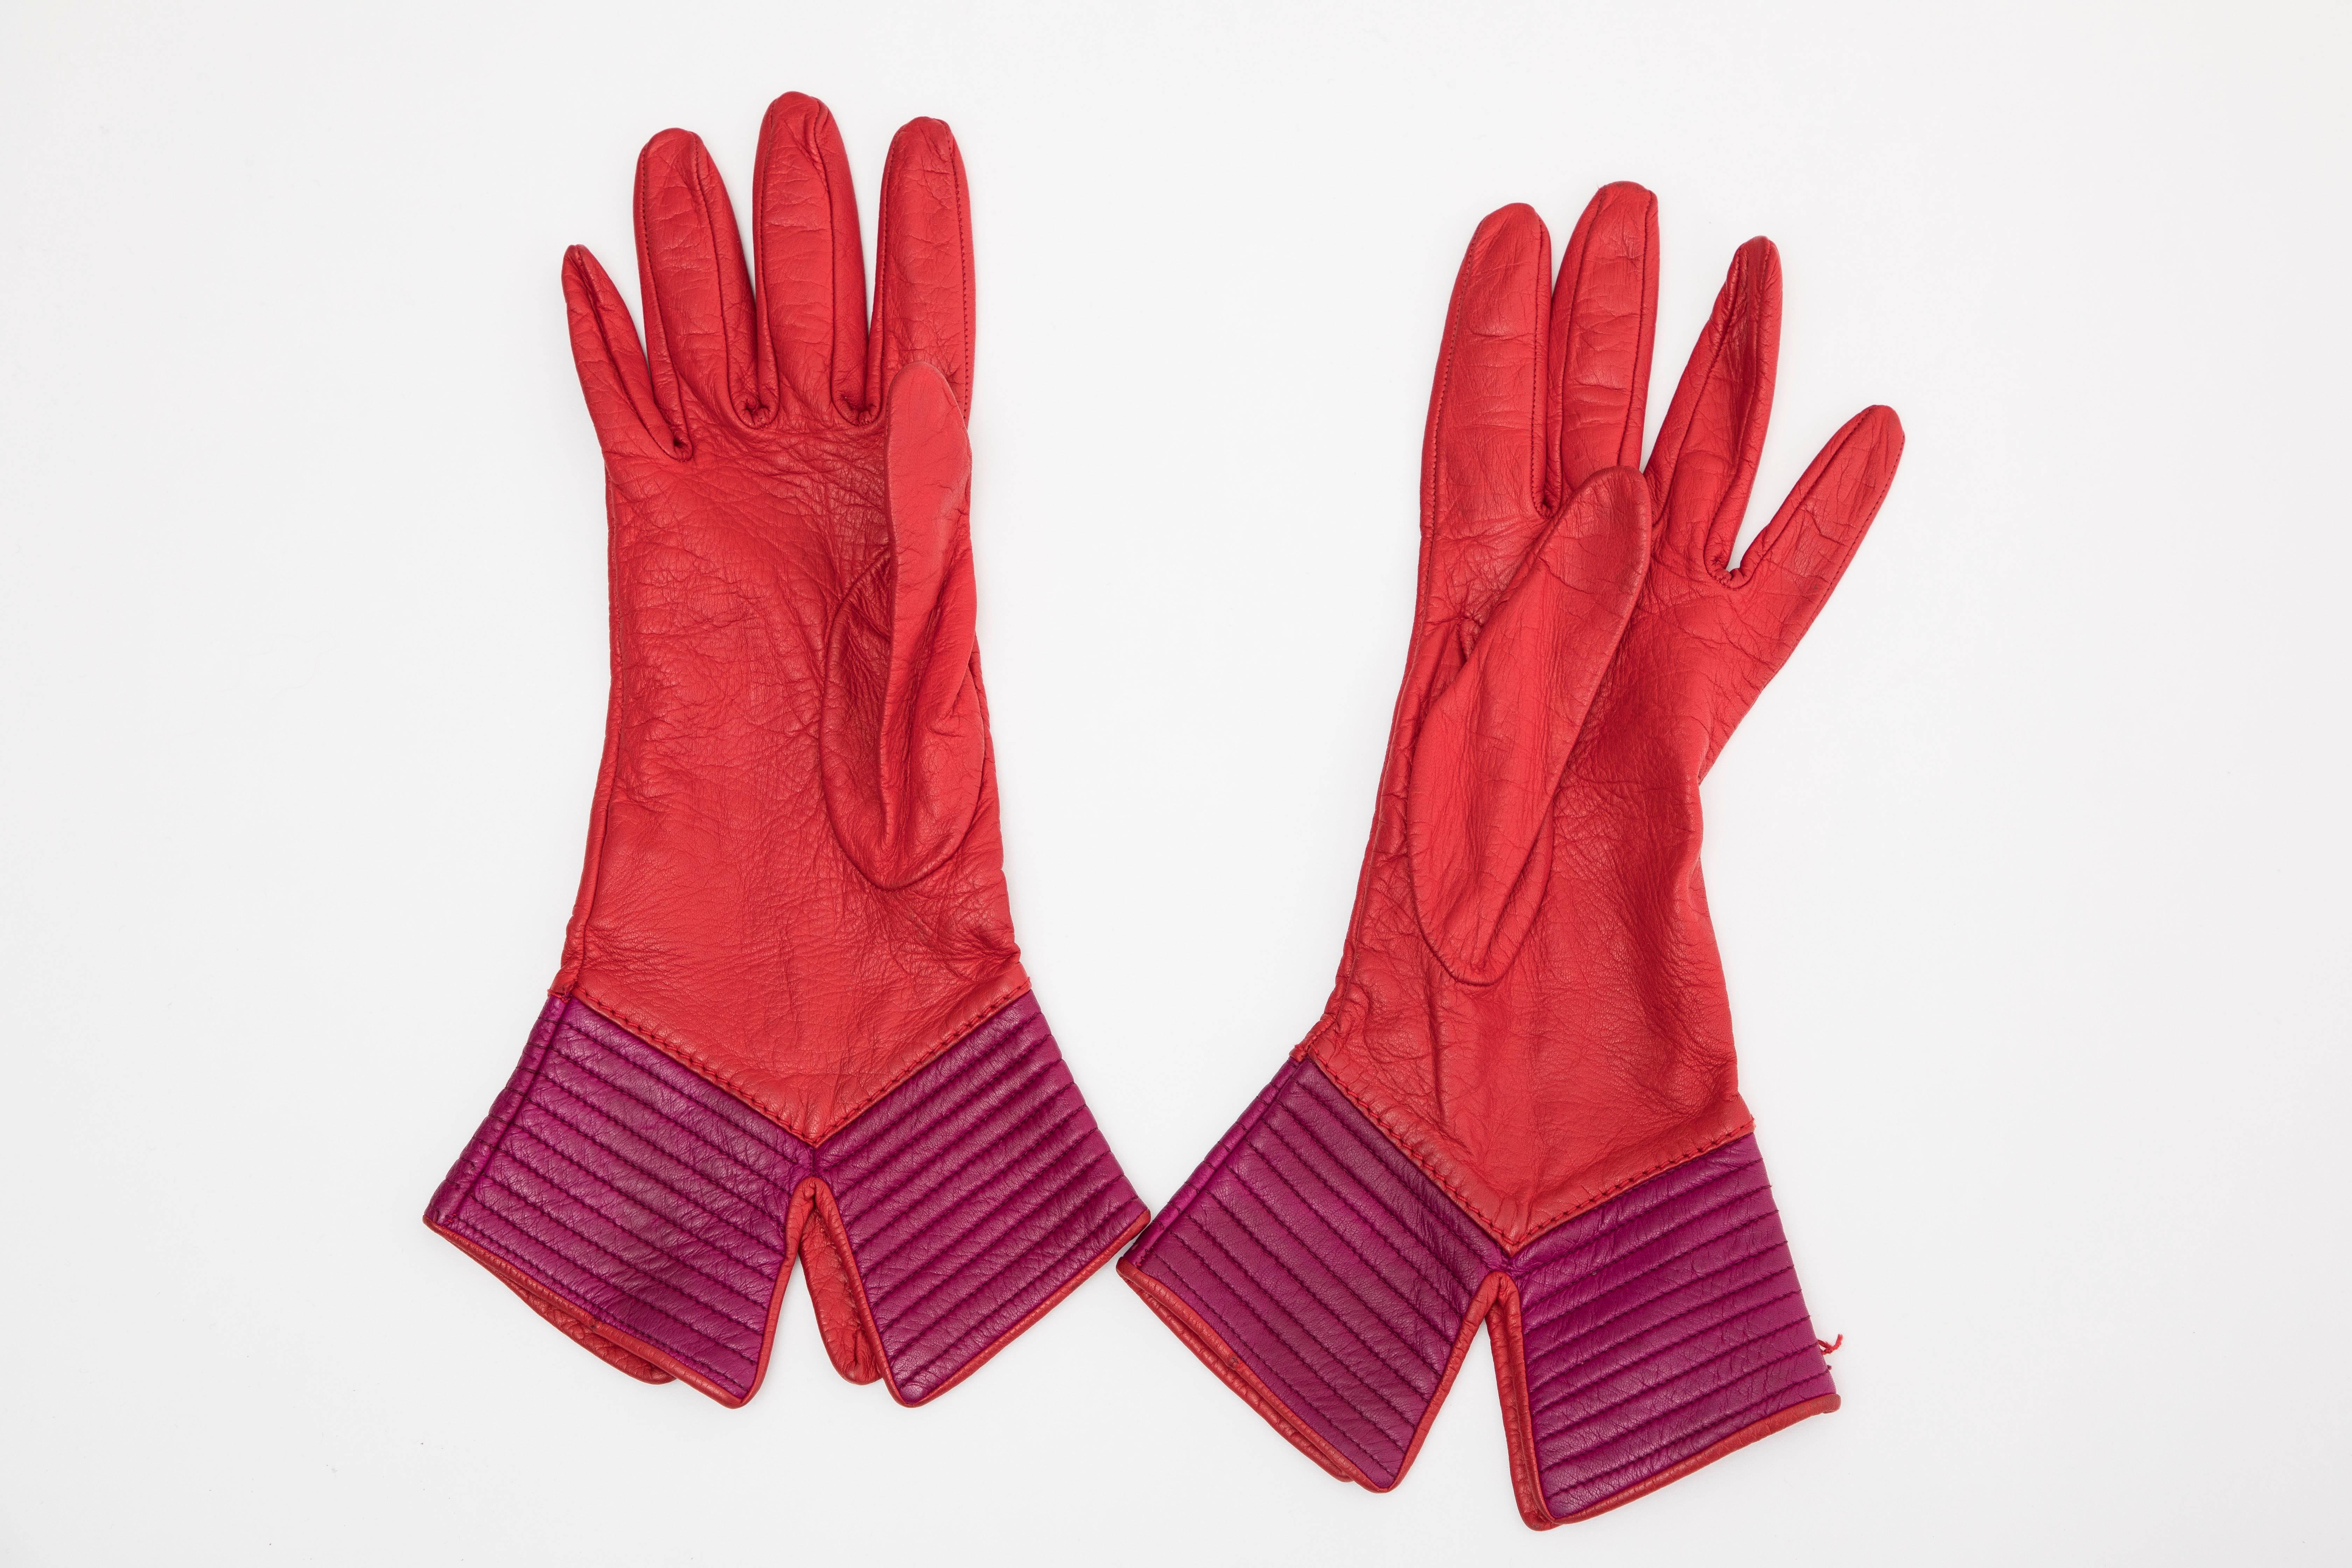 Women's Yves Saint Laurent Color-Block Leather Gloves Silk Lining, Circa 1970s For Sale